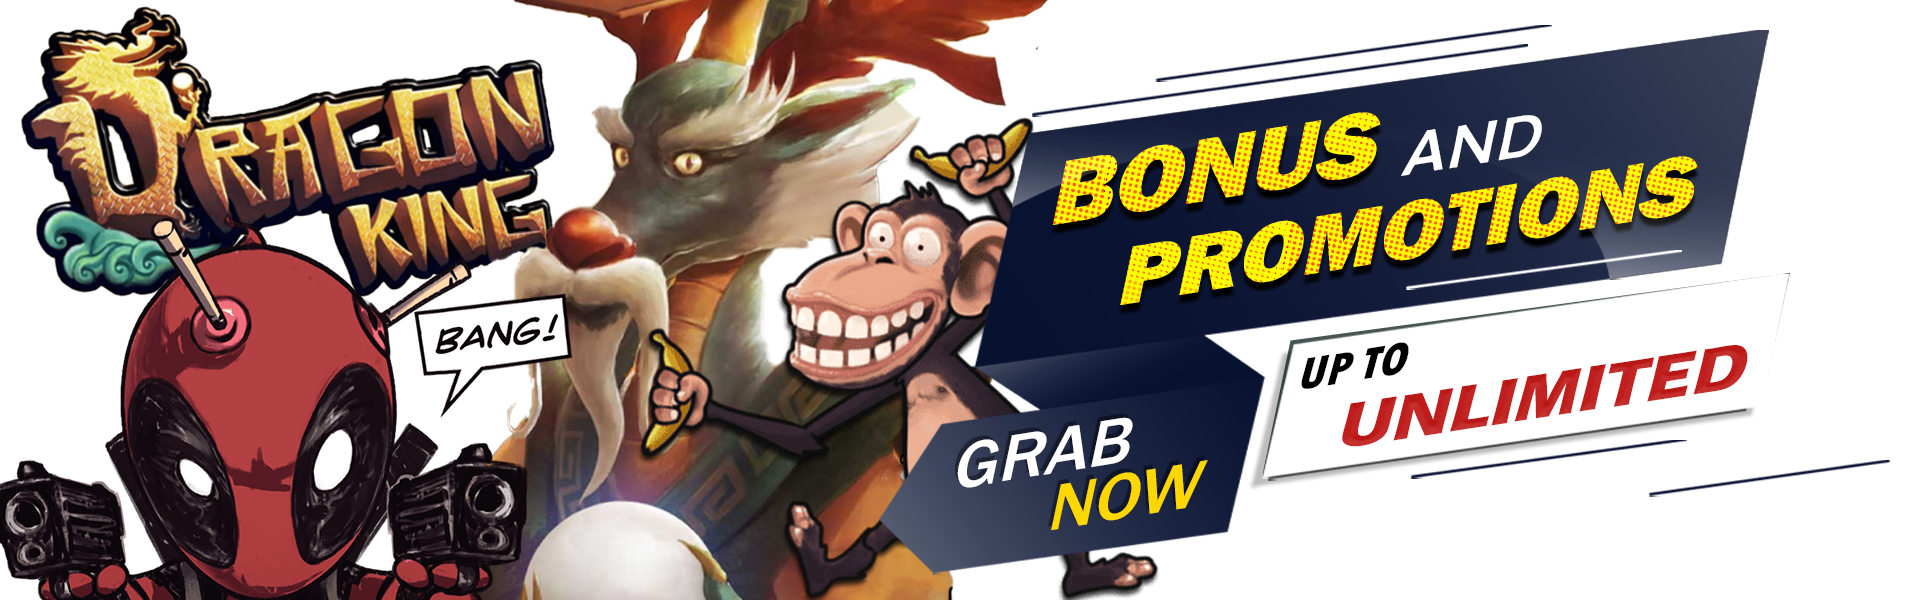 toptrend bonus and promotion banner